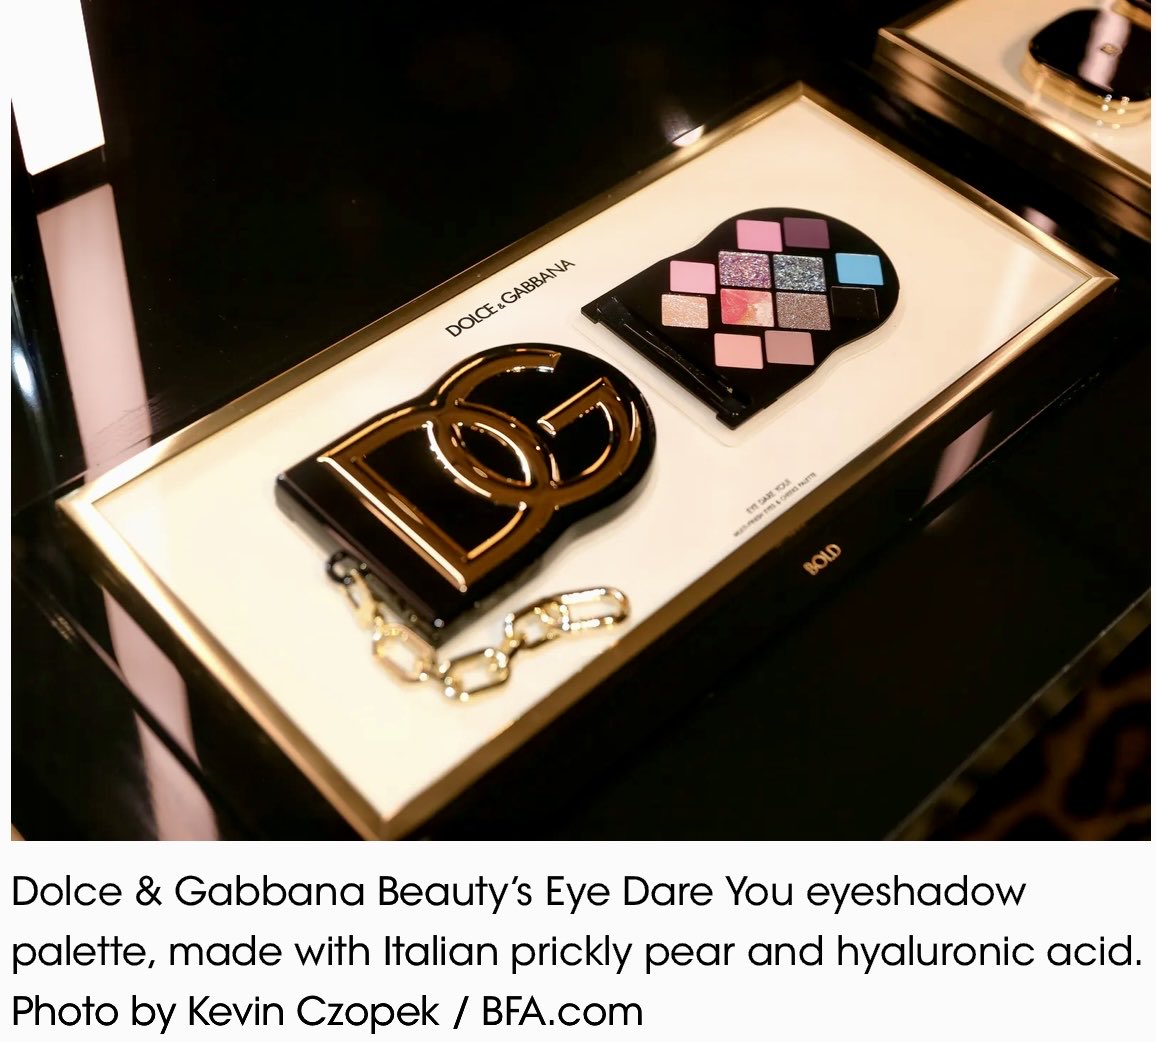 👛 Dolce & Gabbana’s €4 billion bet on #Made in #Italy beauty By Hilary Milnes @voguebusiness #Beauty #makeup @dolcegabbana #BeautyTech #SupplyChain 👉voguebusiness.com/story/beauty/d… The luxury house has relaunched its makeup category a little over two years after bringing its